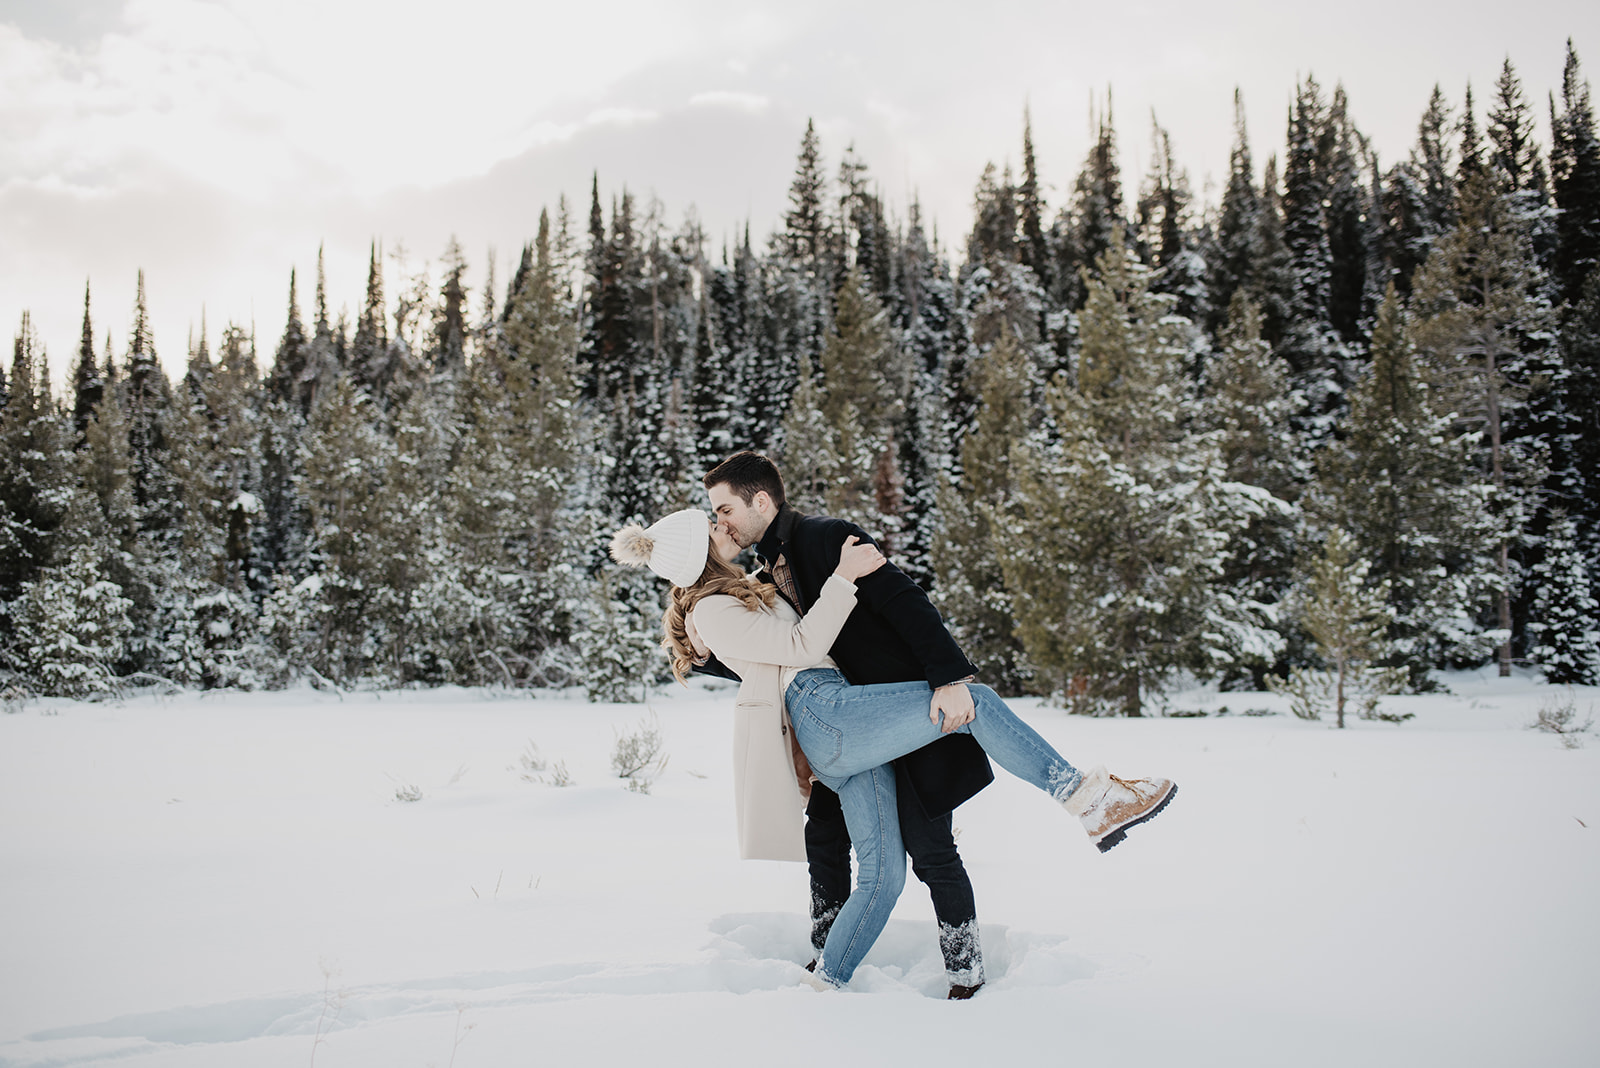 winter engagement session in Jackson Hole with man dipping the woman and holding her leg while kissing passionately